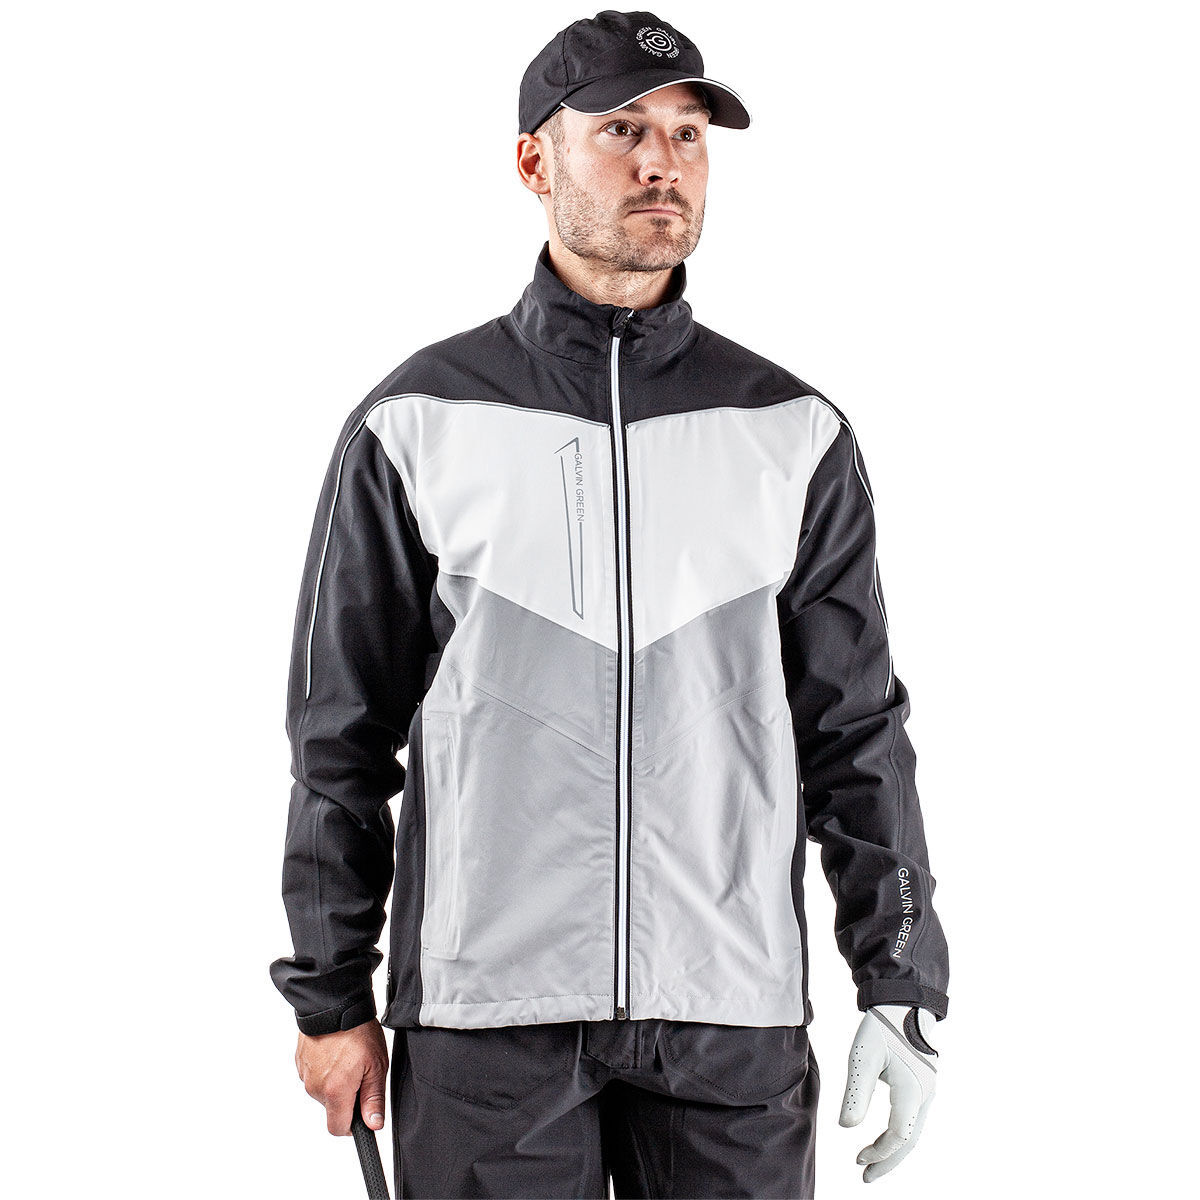 Galvin Green Men’s Black, White and Grey Waterproof Armstrong Golf Jacket, Size: Large | American Golf